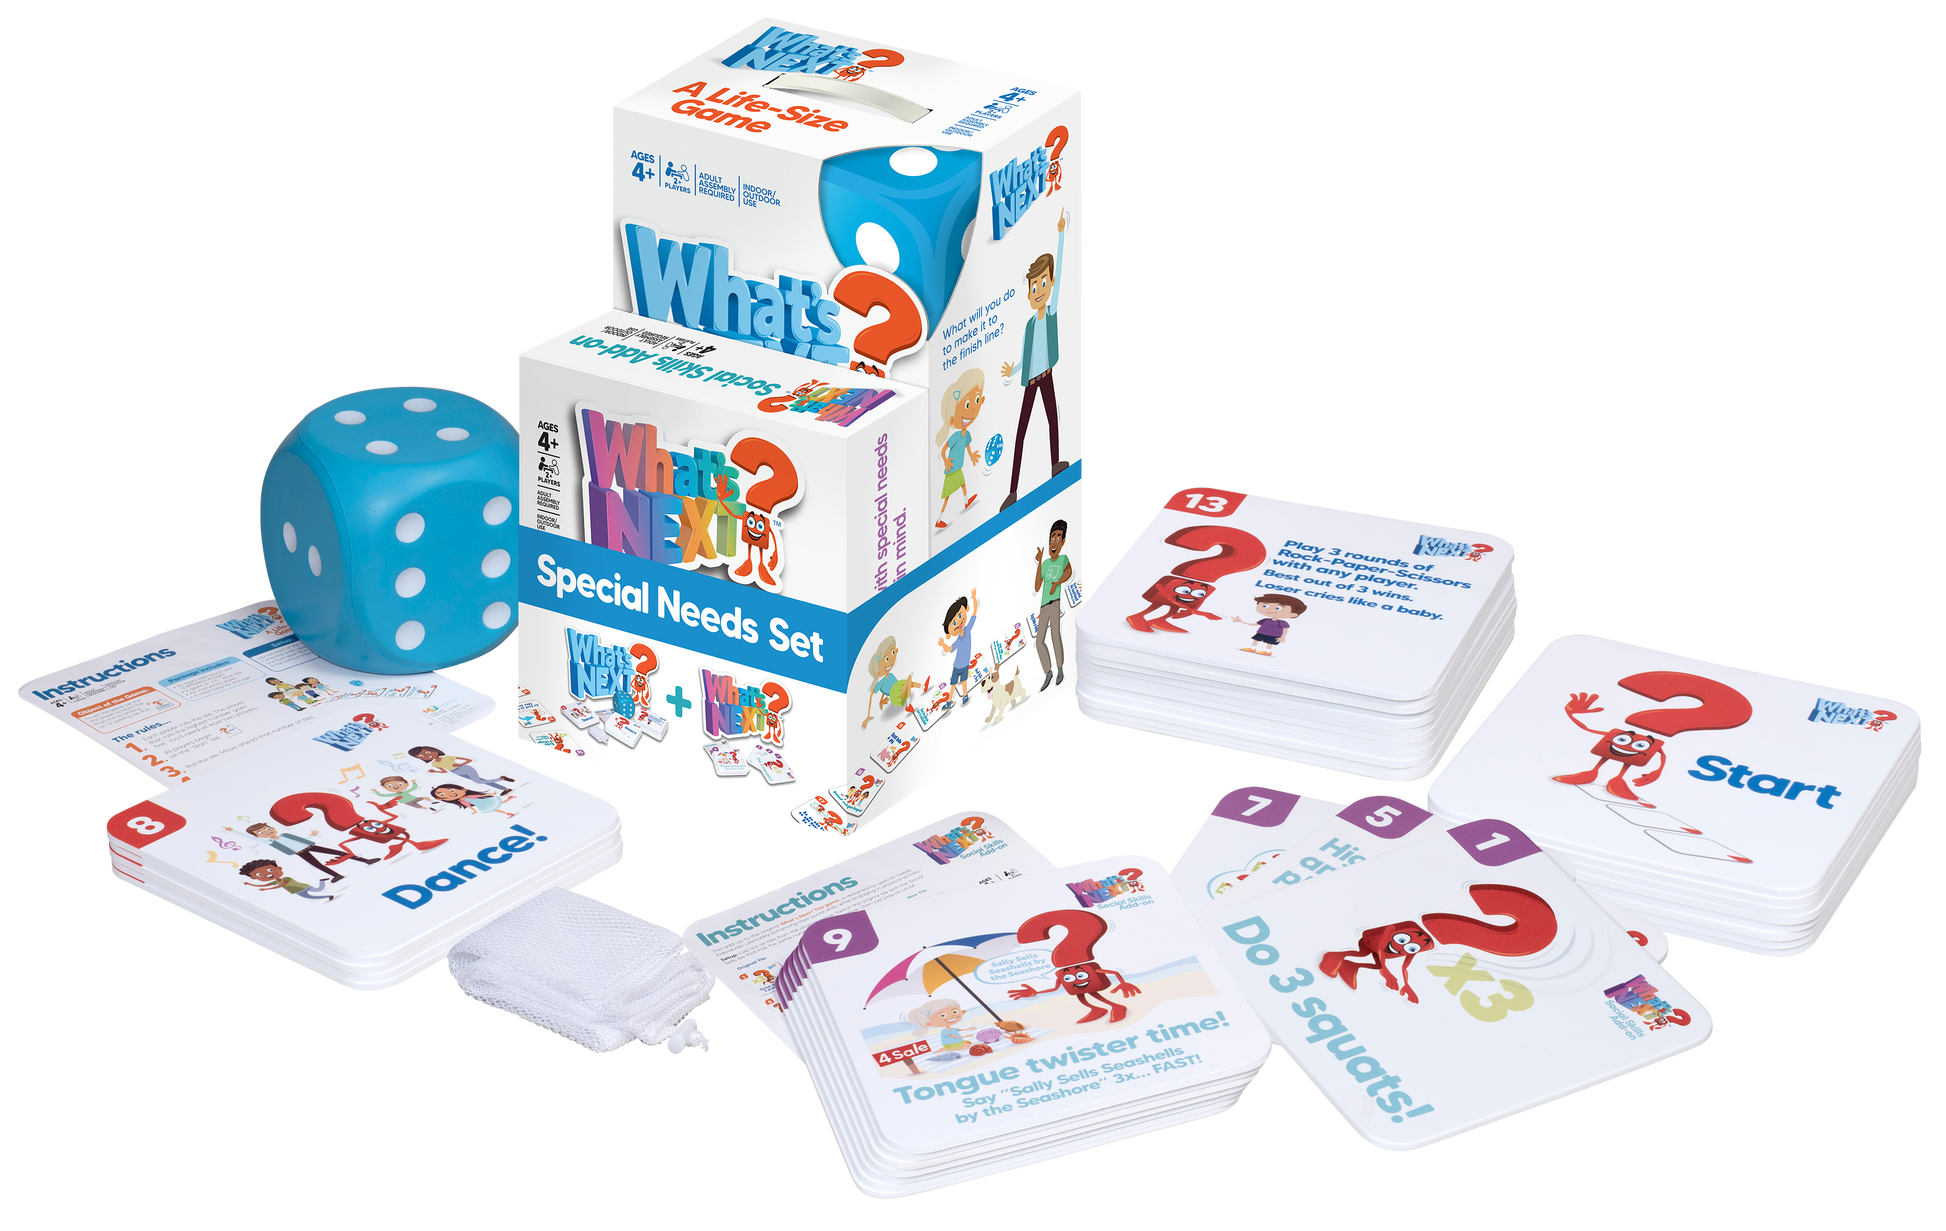 What's Next? Special Needs Set - Case of 8 (WNSNS1) - M&J Games, LLC